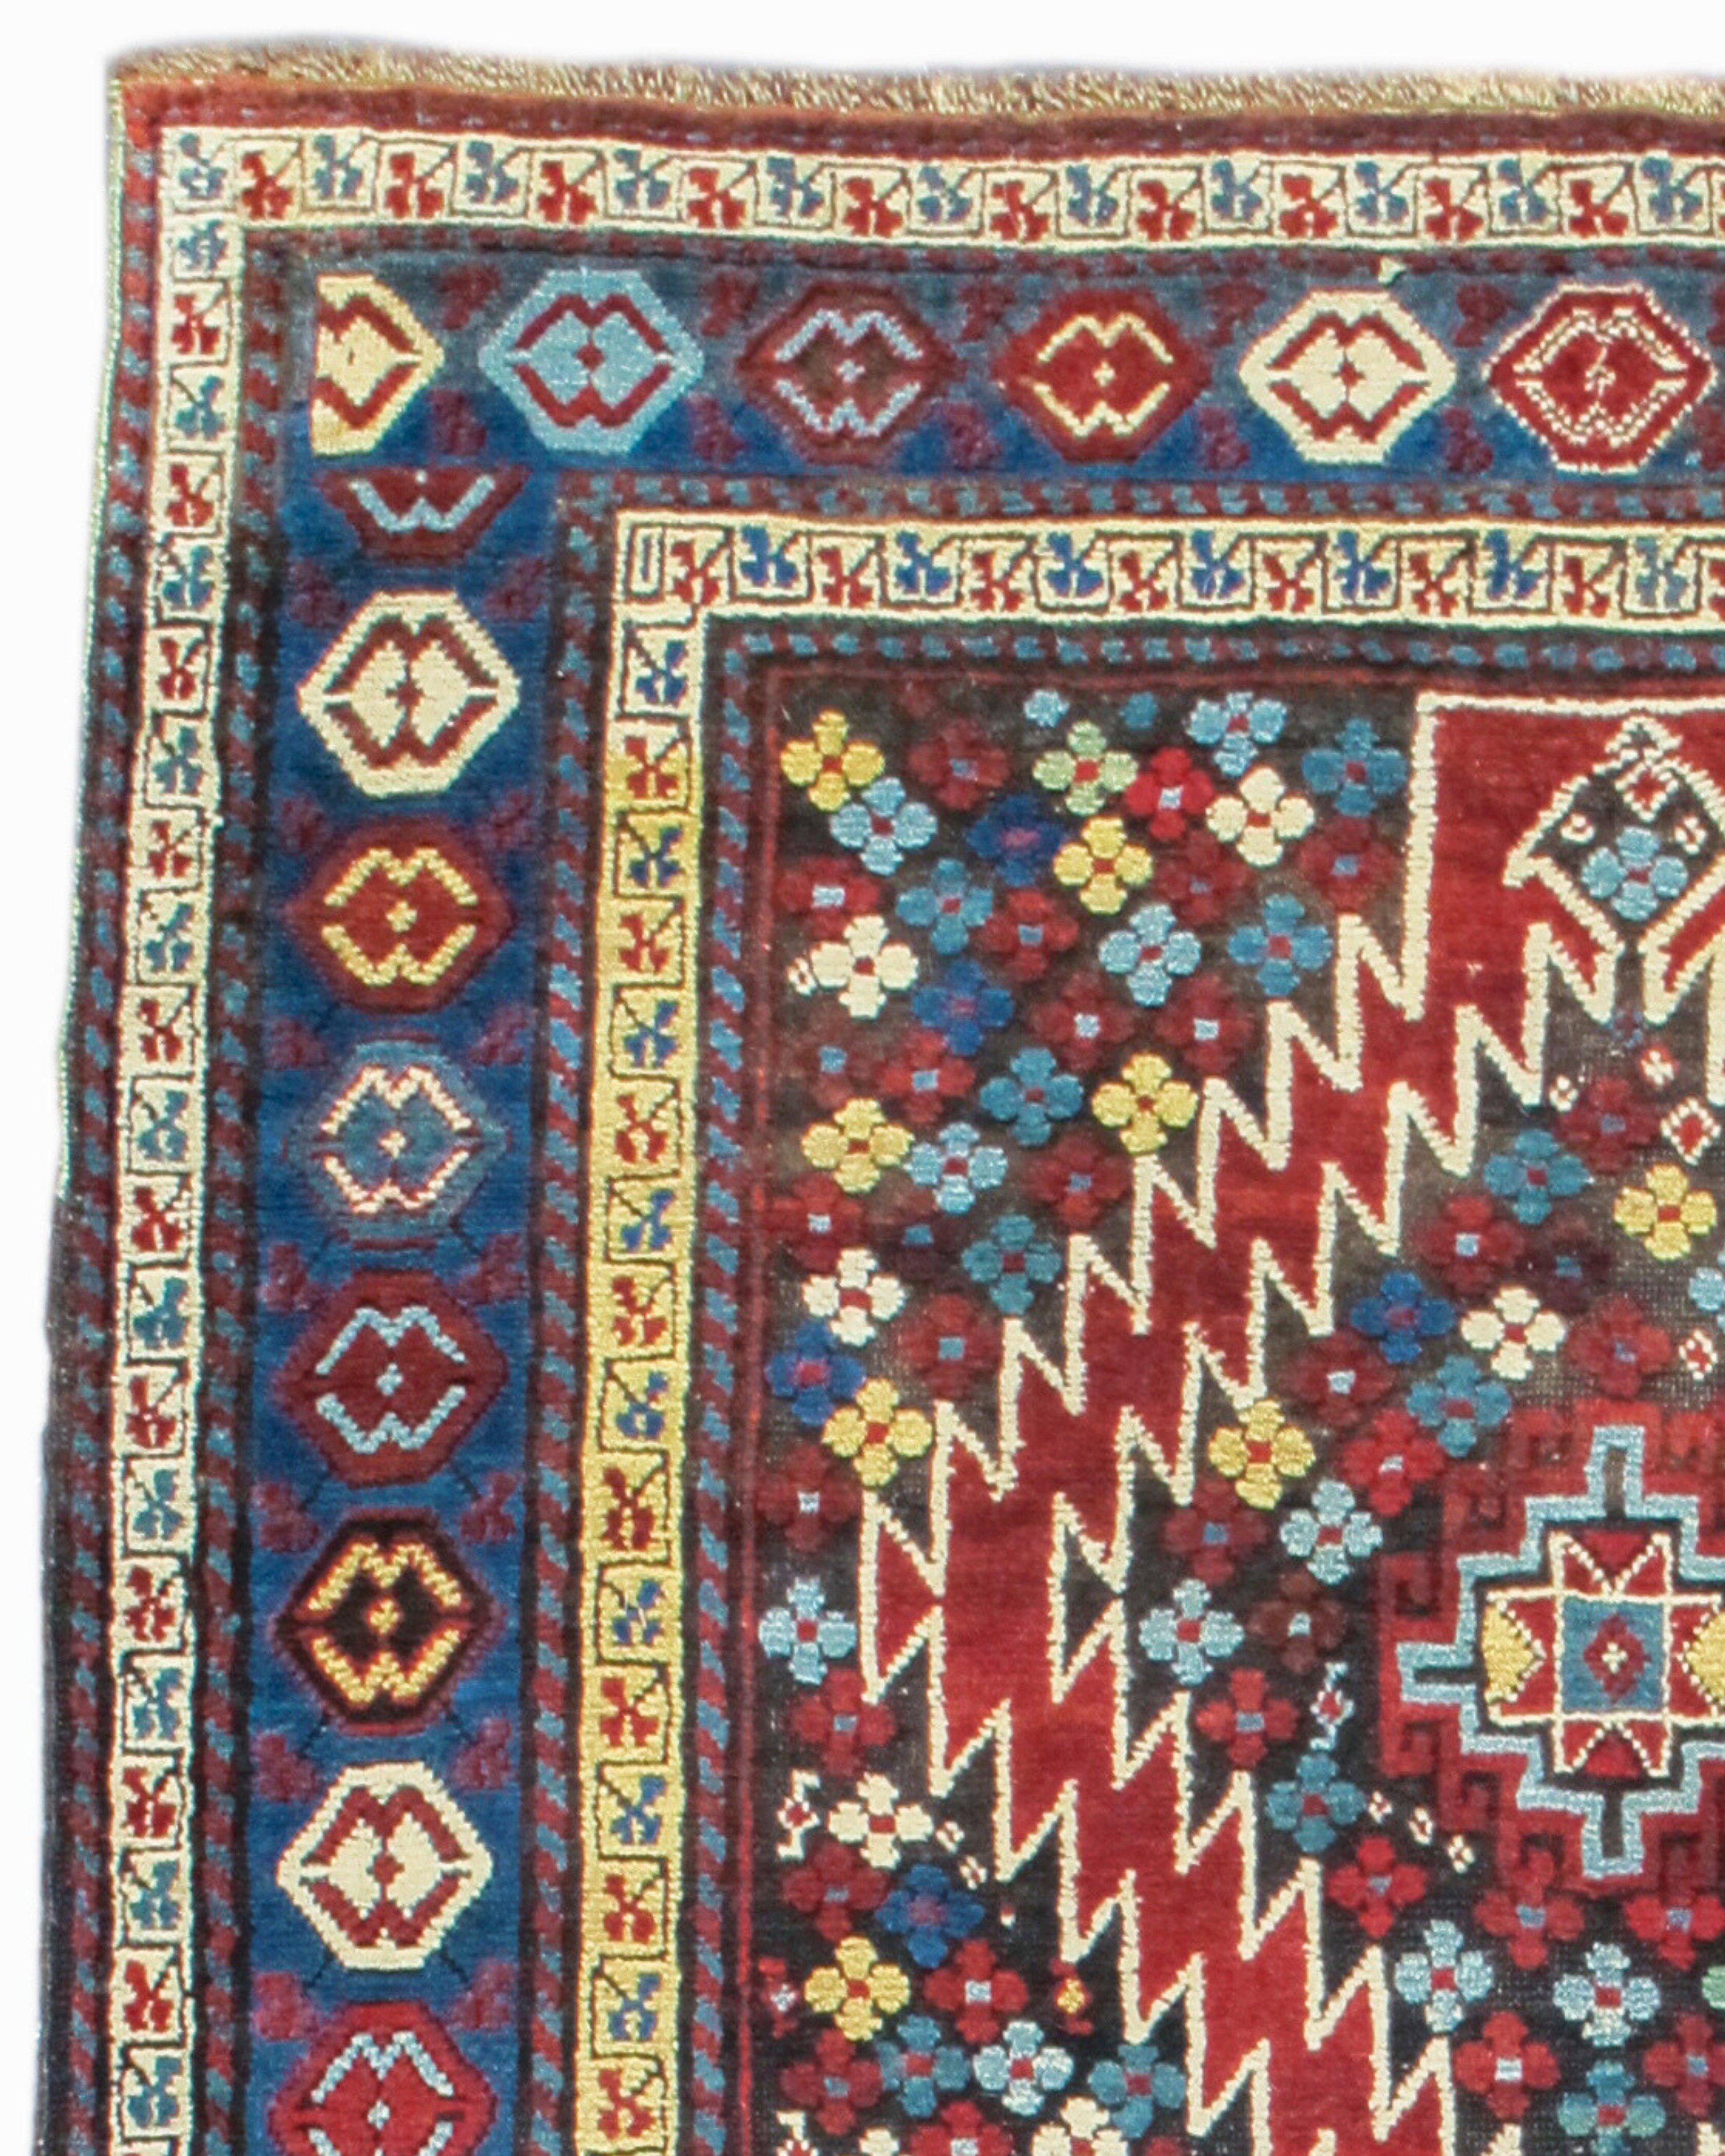 Hand-Woven Antique Caucasian Karabagh Rug, Late 19th Century  For Sale